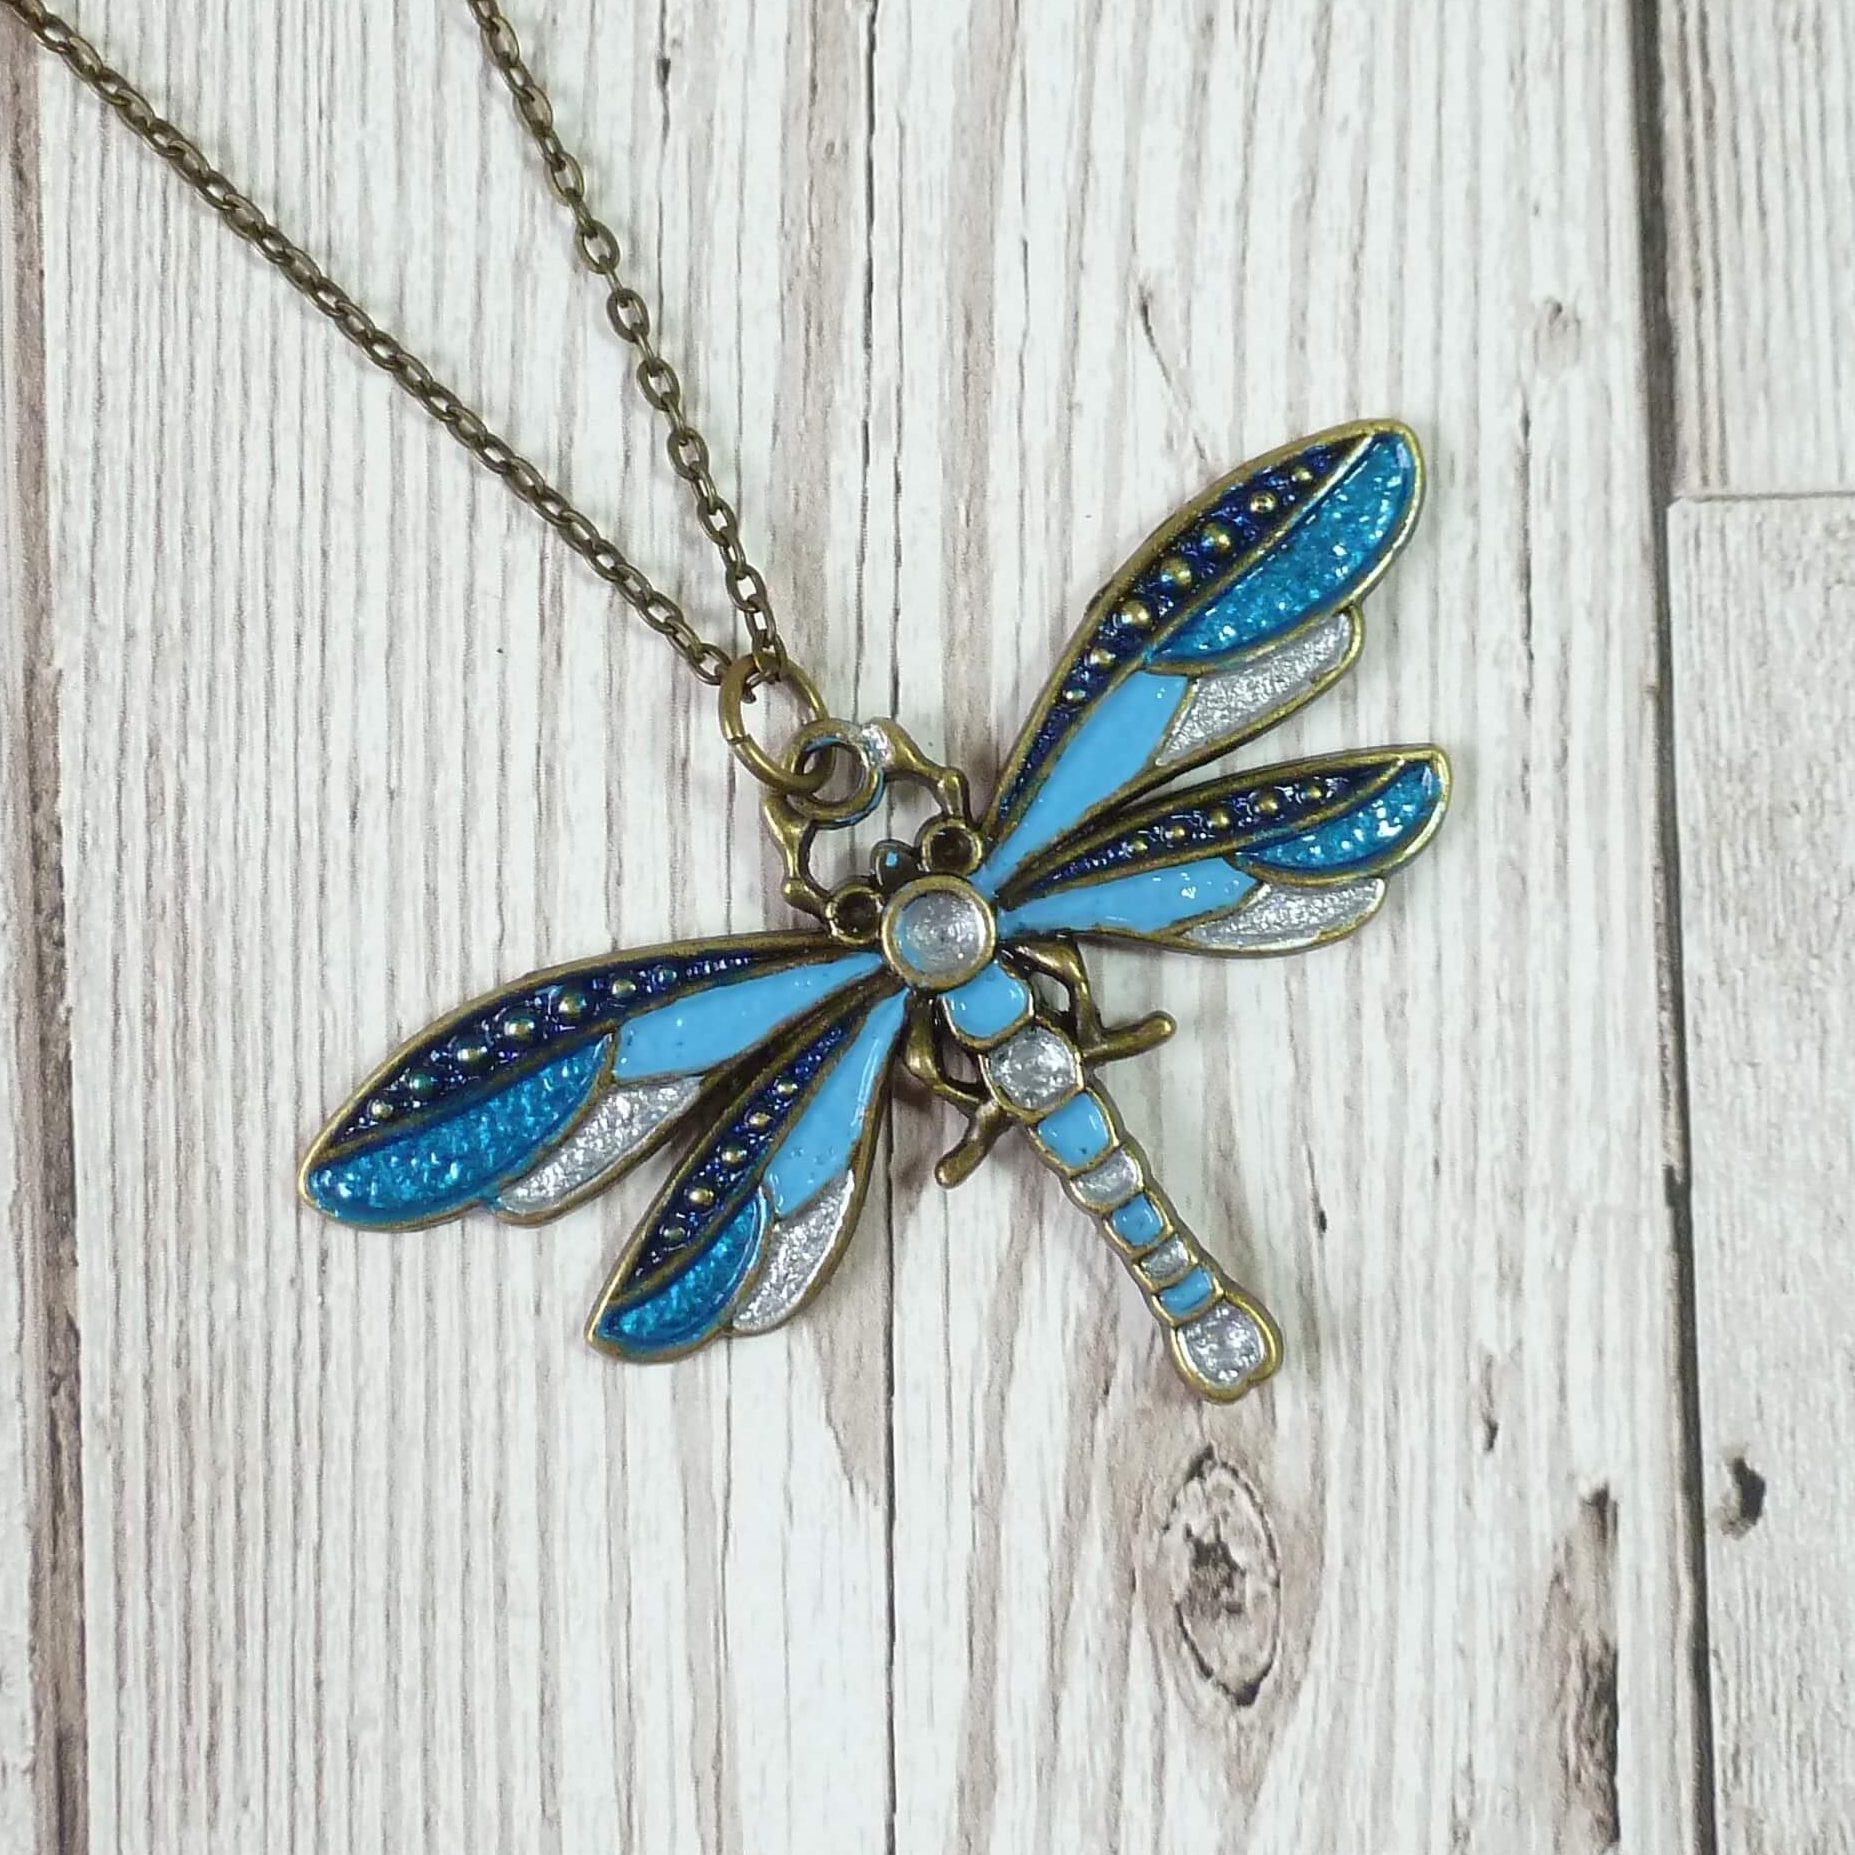 malm Mangler bag Blue and Silver Dragonfly Pendant - A Charm of Magpies Shop